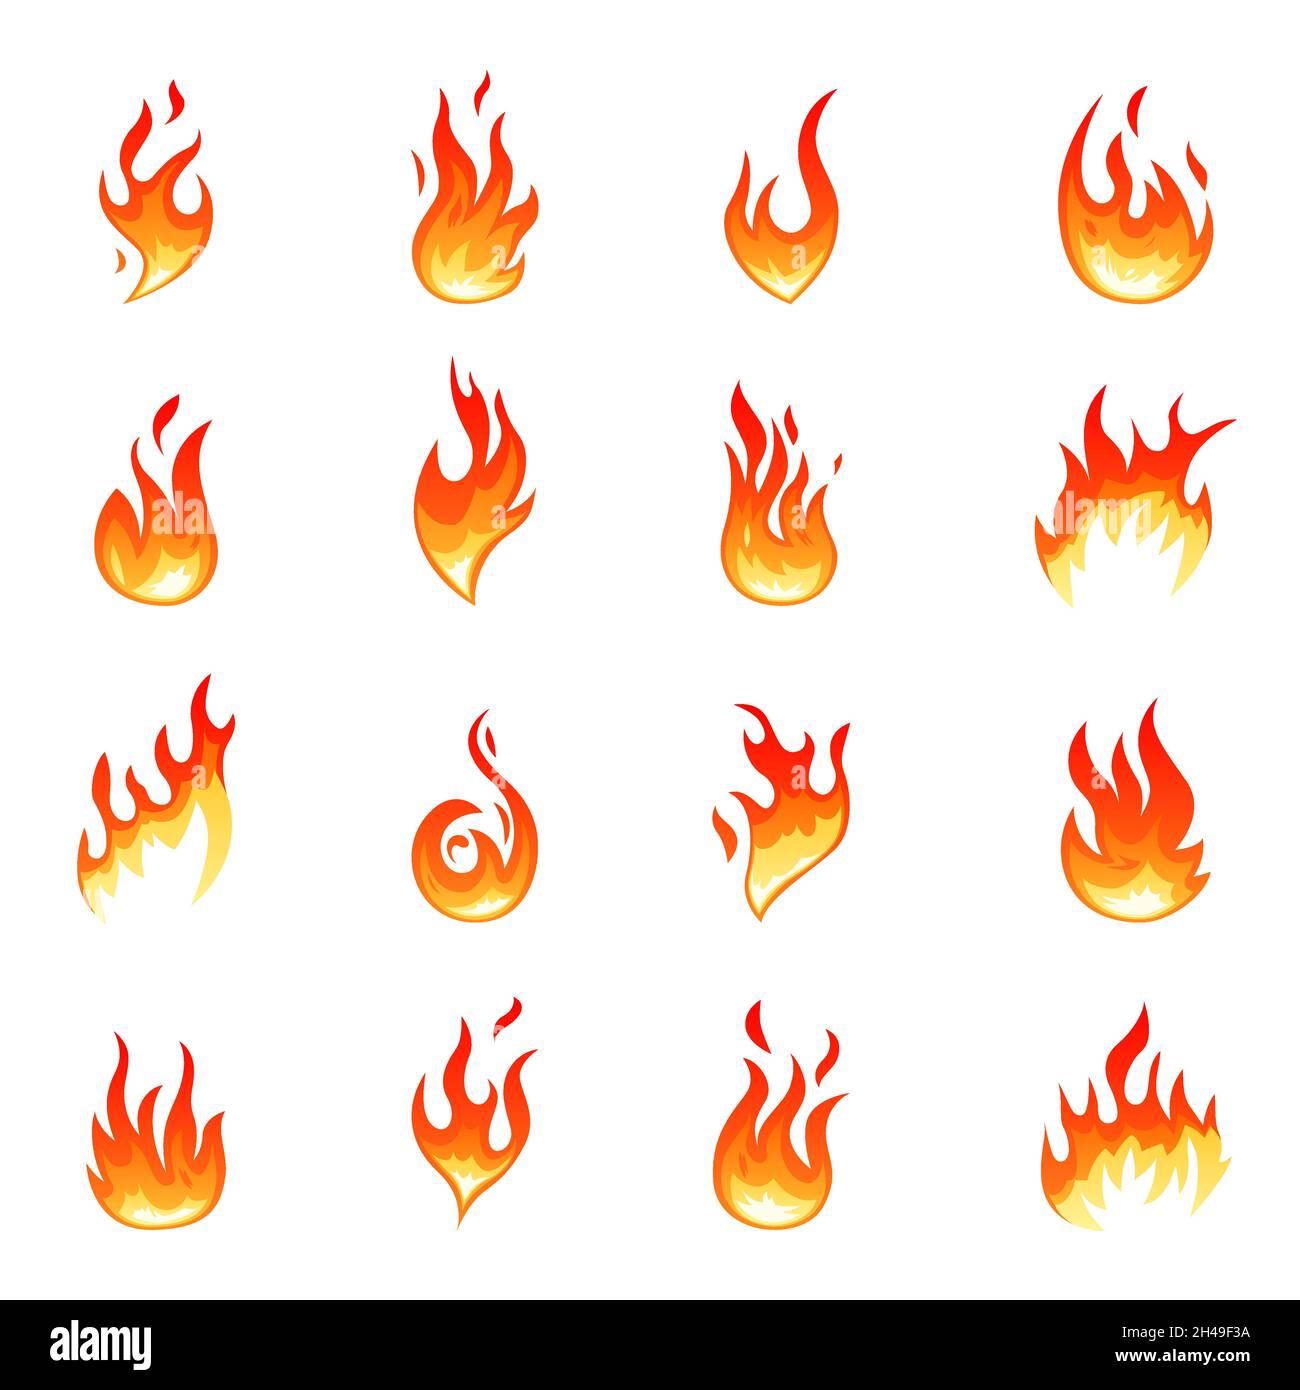 Cartoon flame collection. Hot fire flames, isolated glowing red heat. Heating graphic elements, torch effect. Bonfire shapes recent vector icons Stock Vector